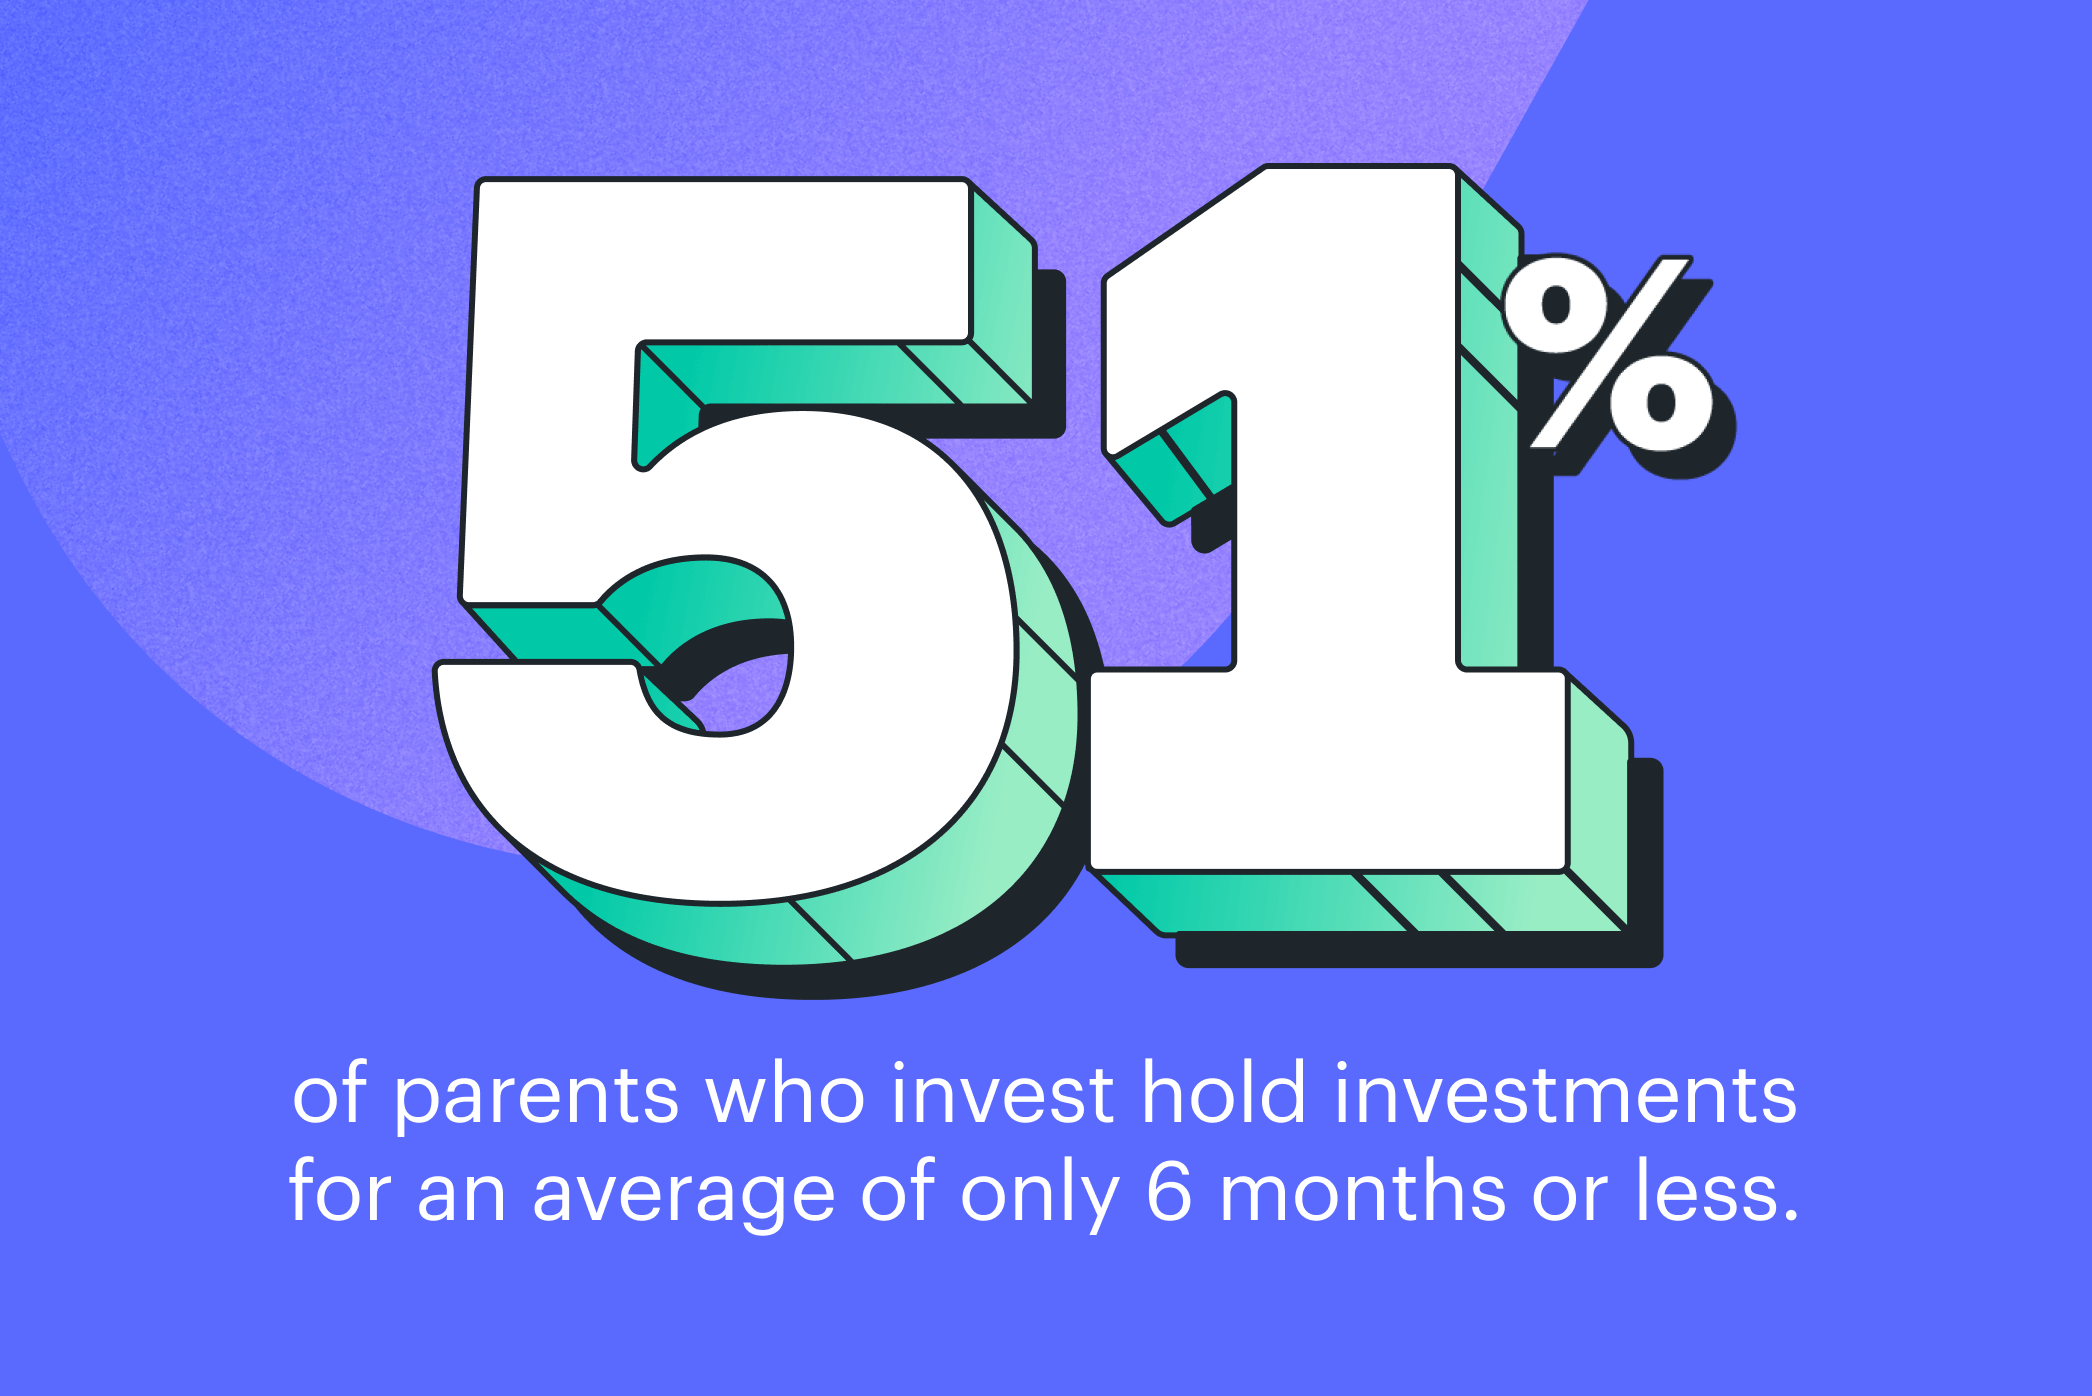 Statistic: 51% of parents who invest hold investments for an average of only 6 months or less.
